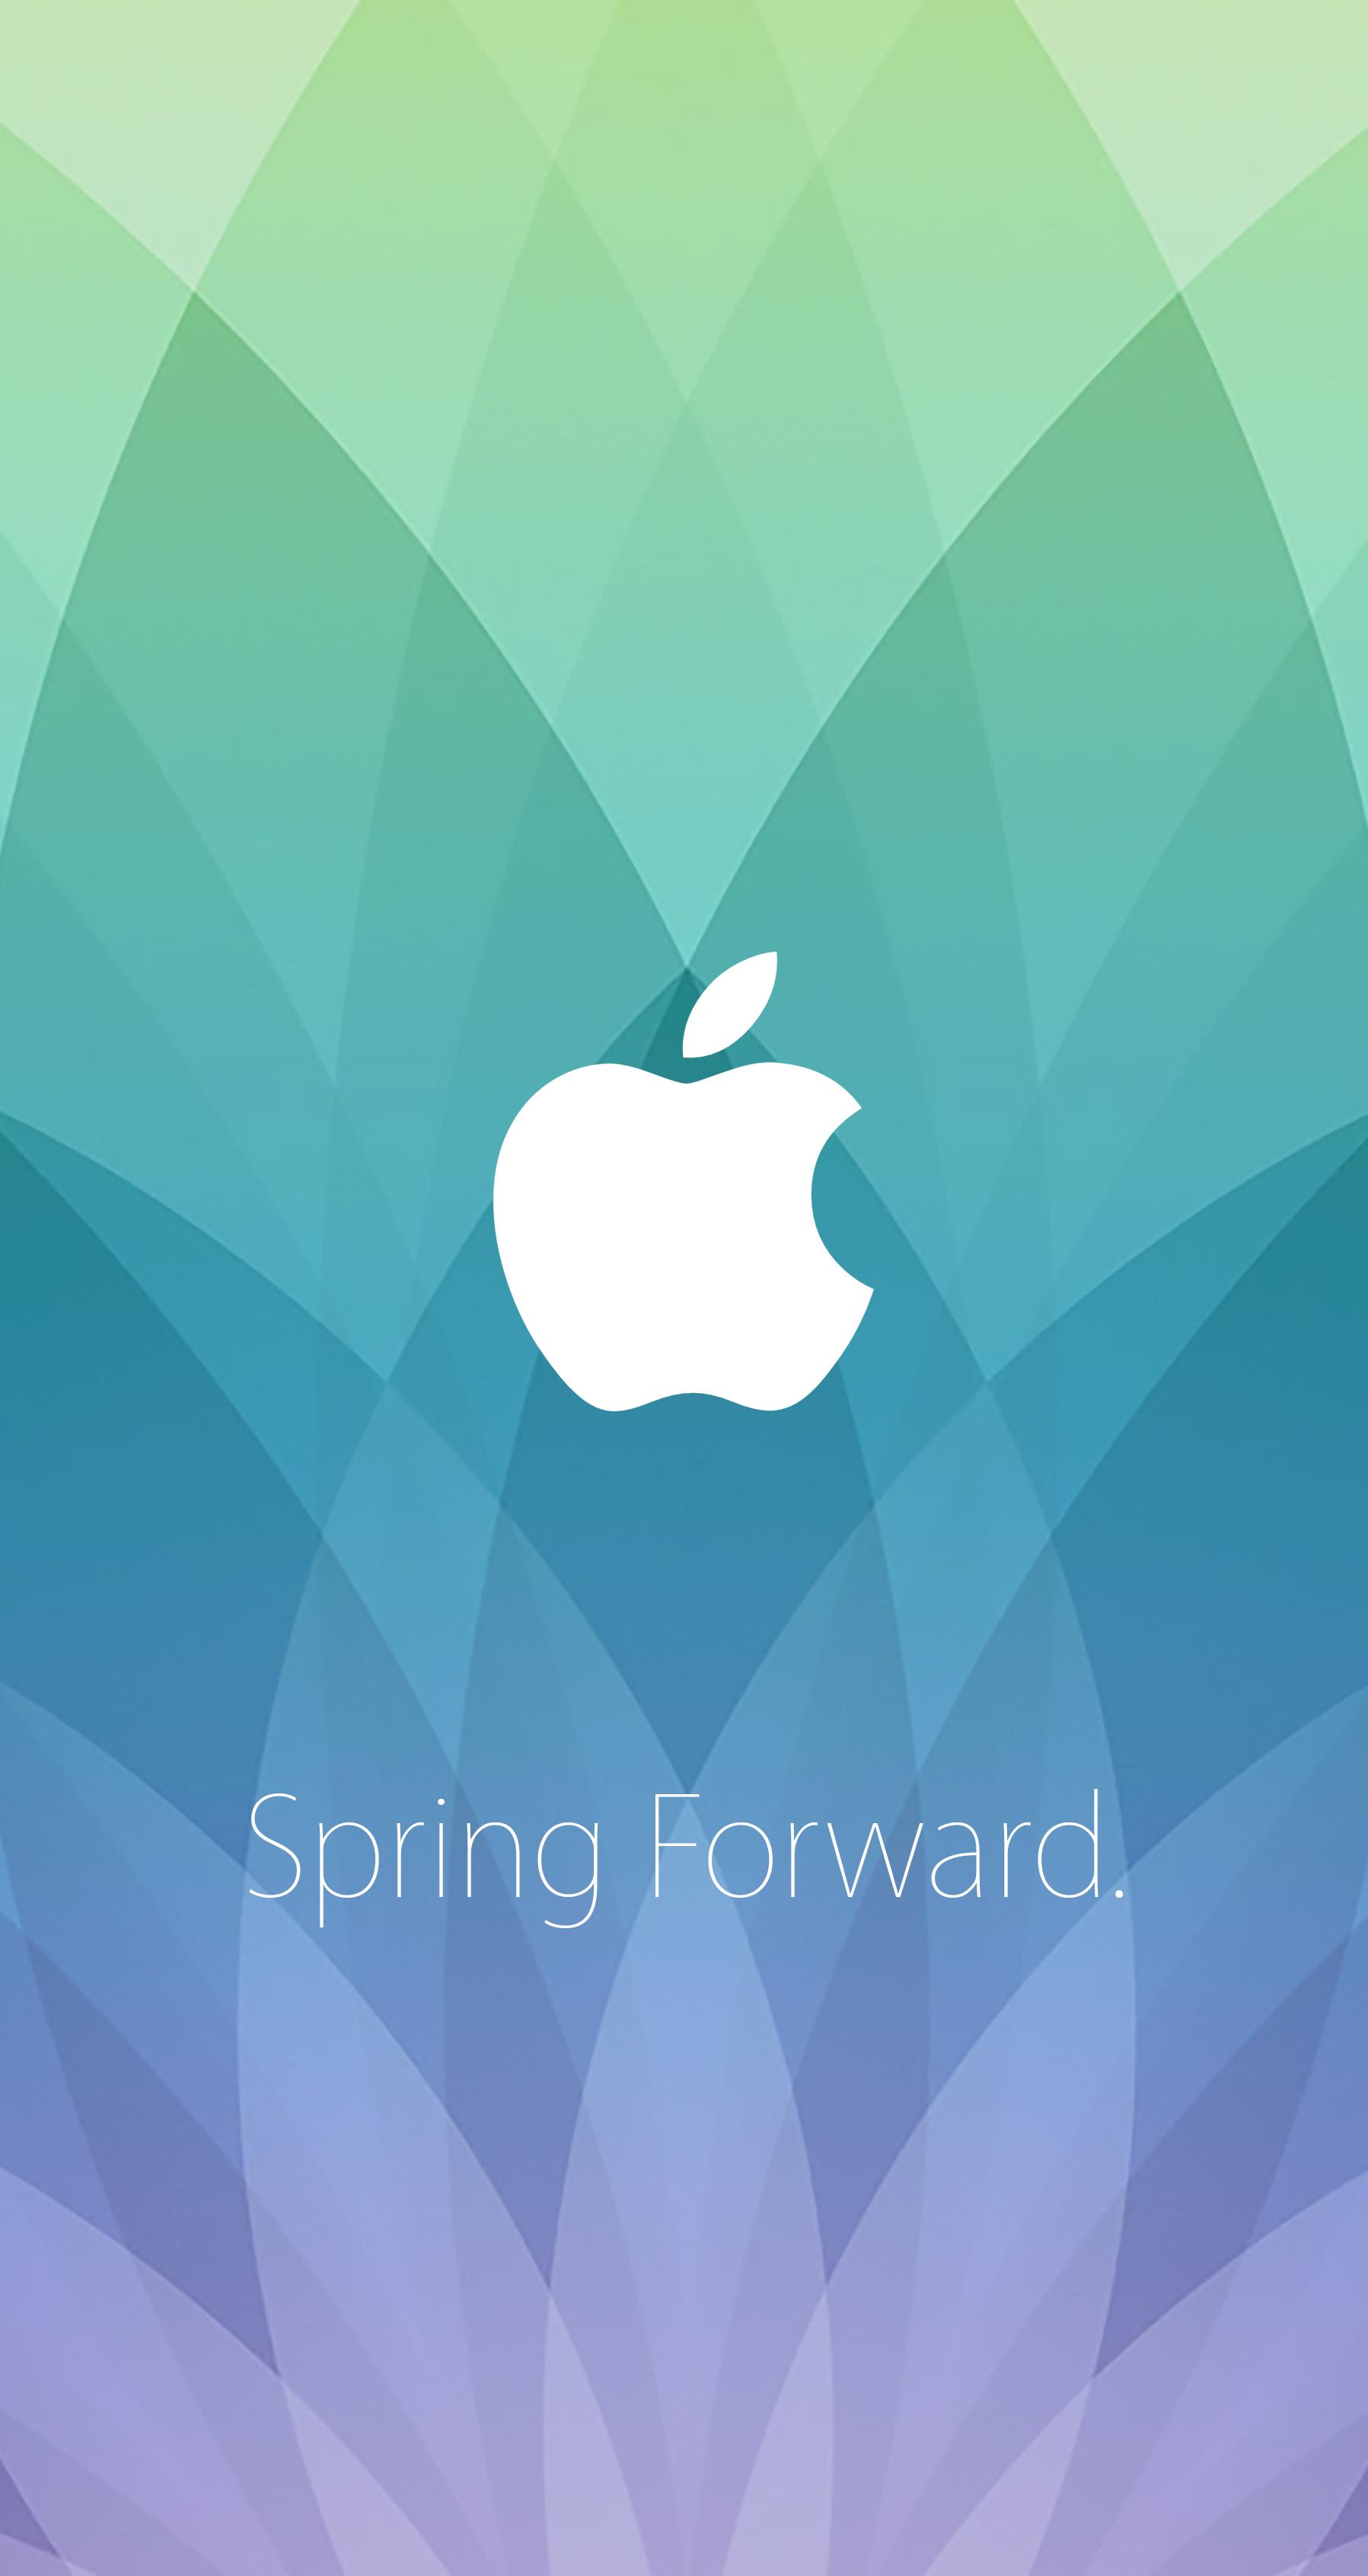 Apple Watch event wallpapers put Spring Forward invite on your Mac